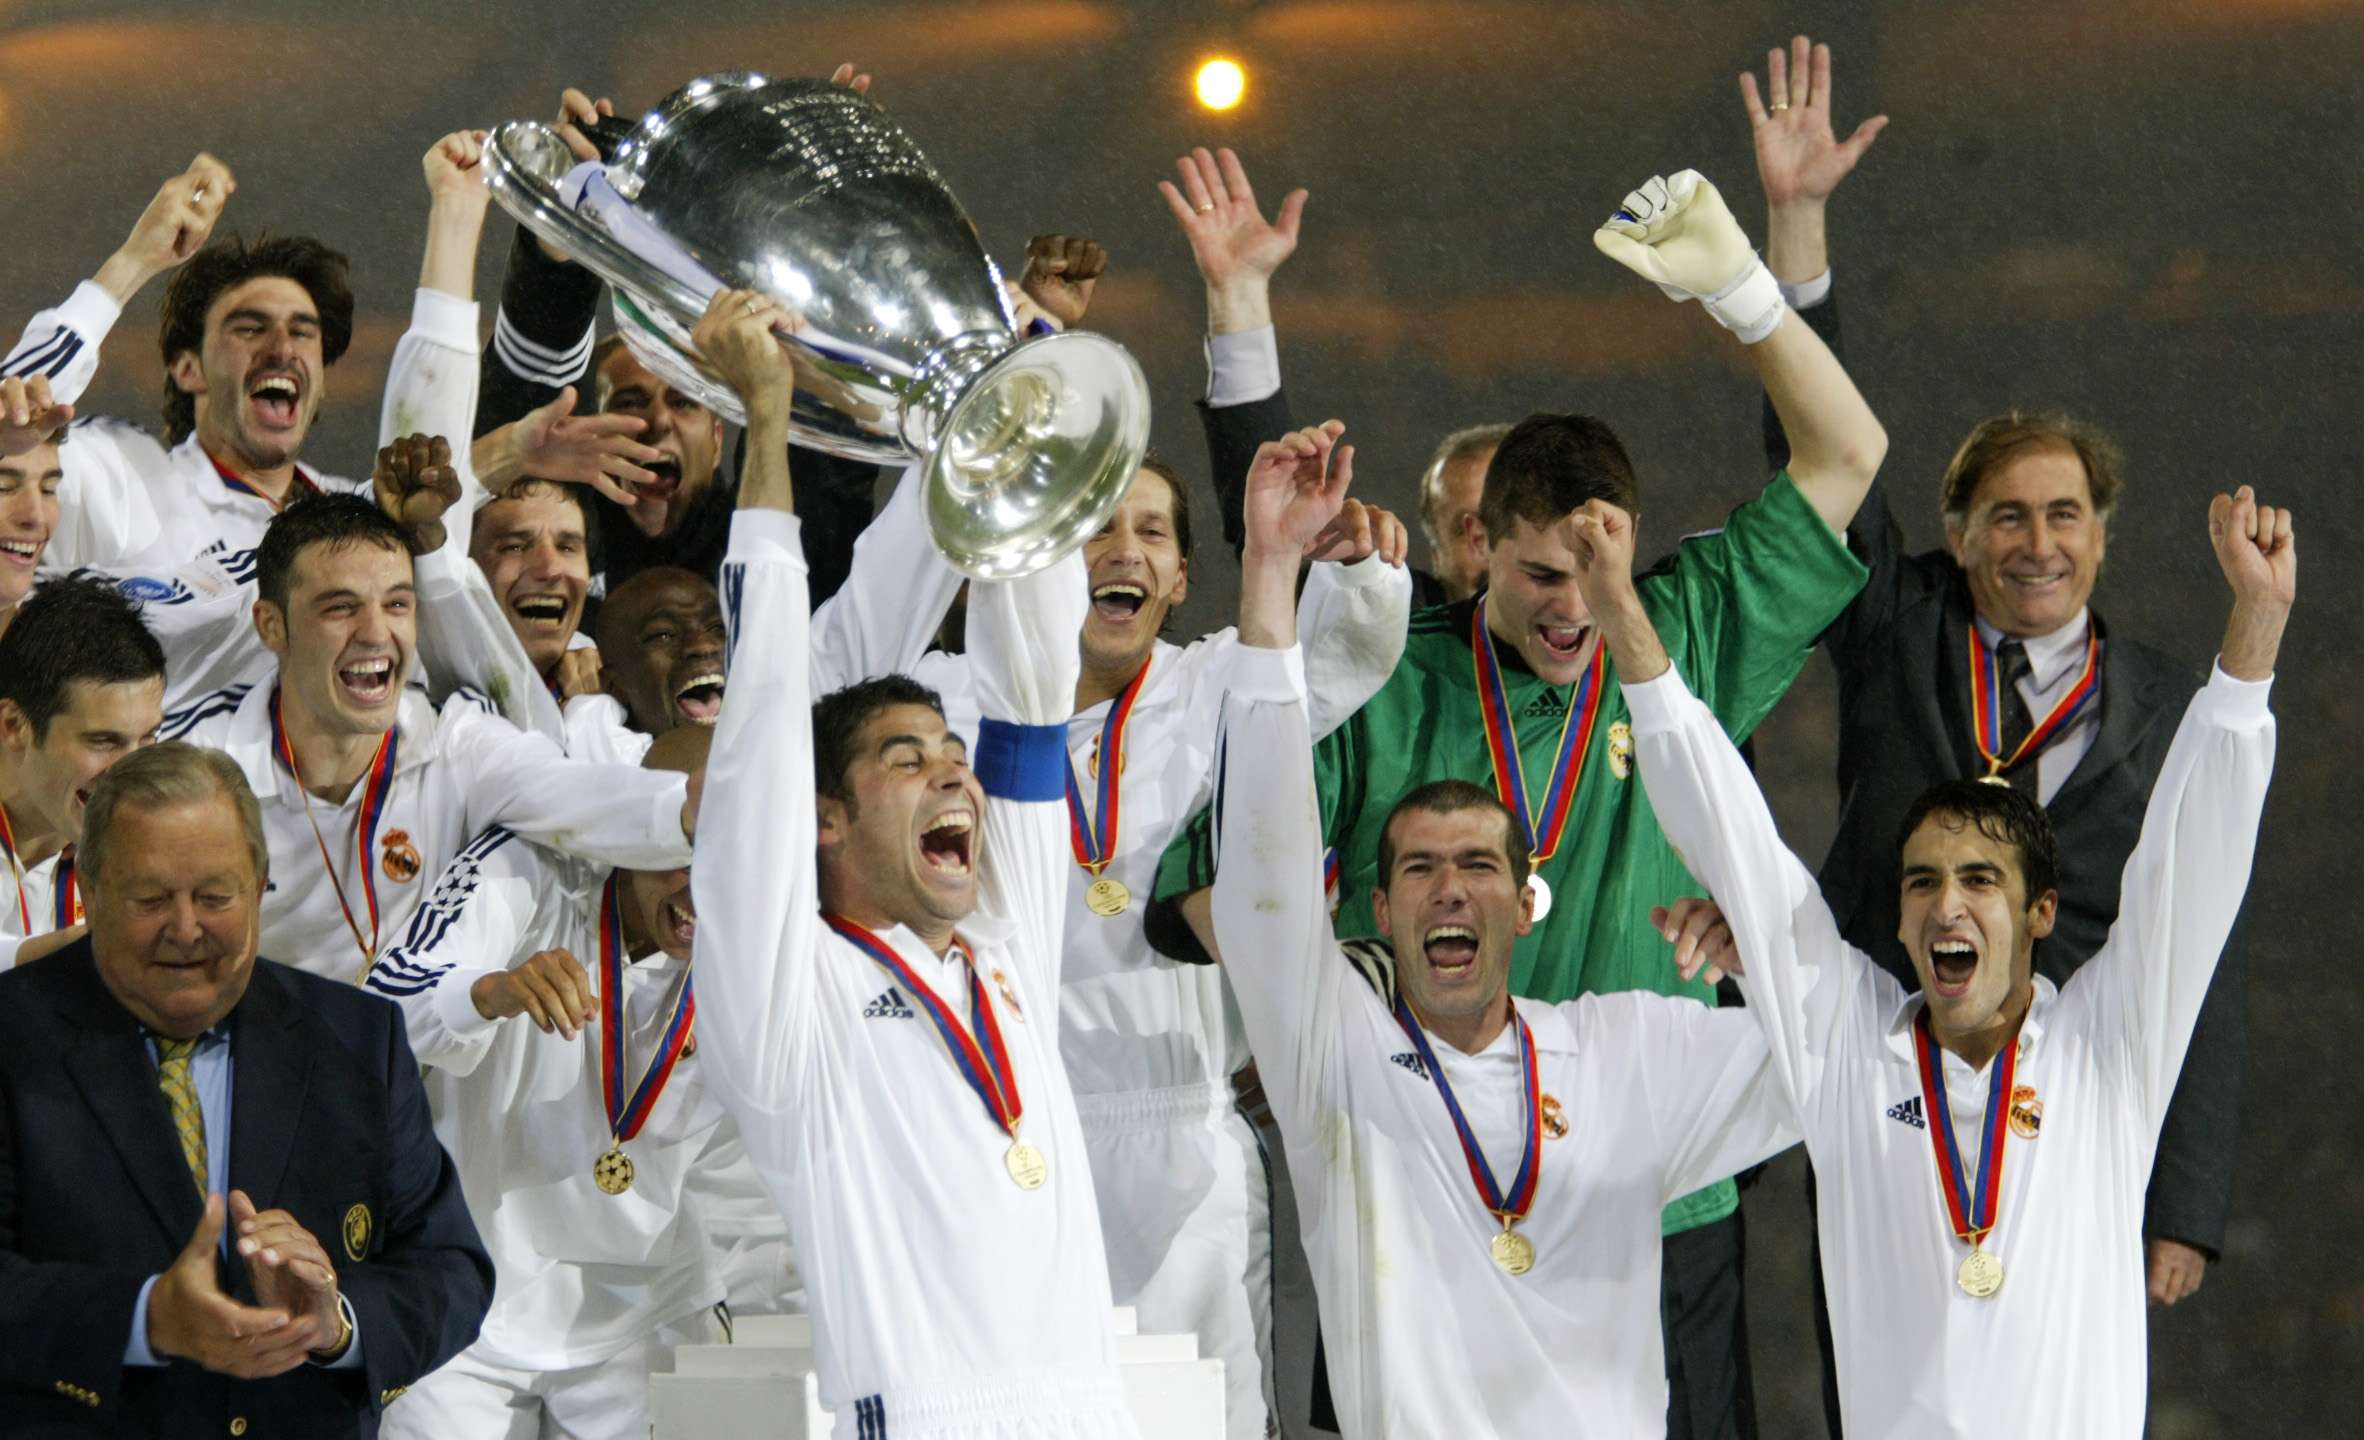 Real Madrid's Fernando Hierro lifts the UEFA Champions League trophy in 2002